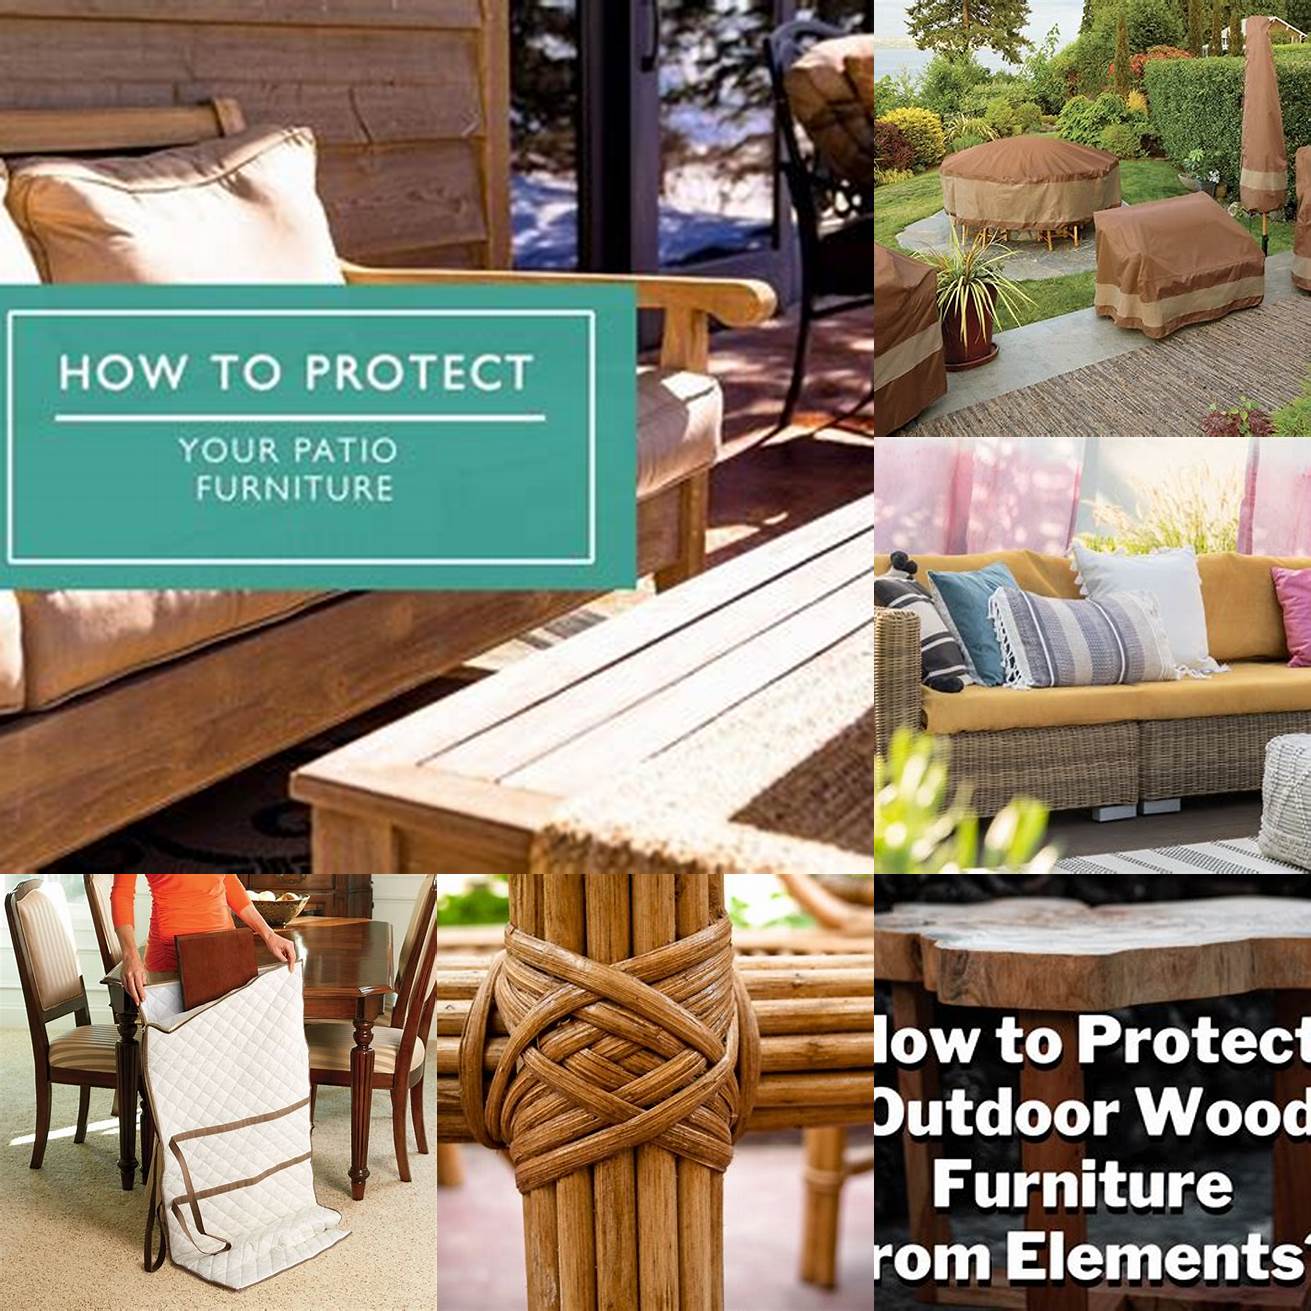 Protecting your furniture from the elements